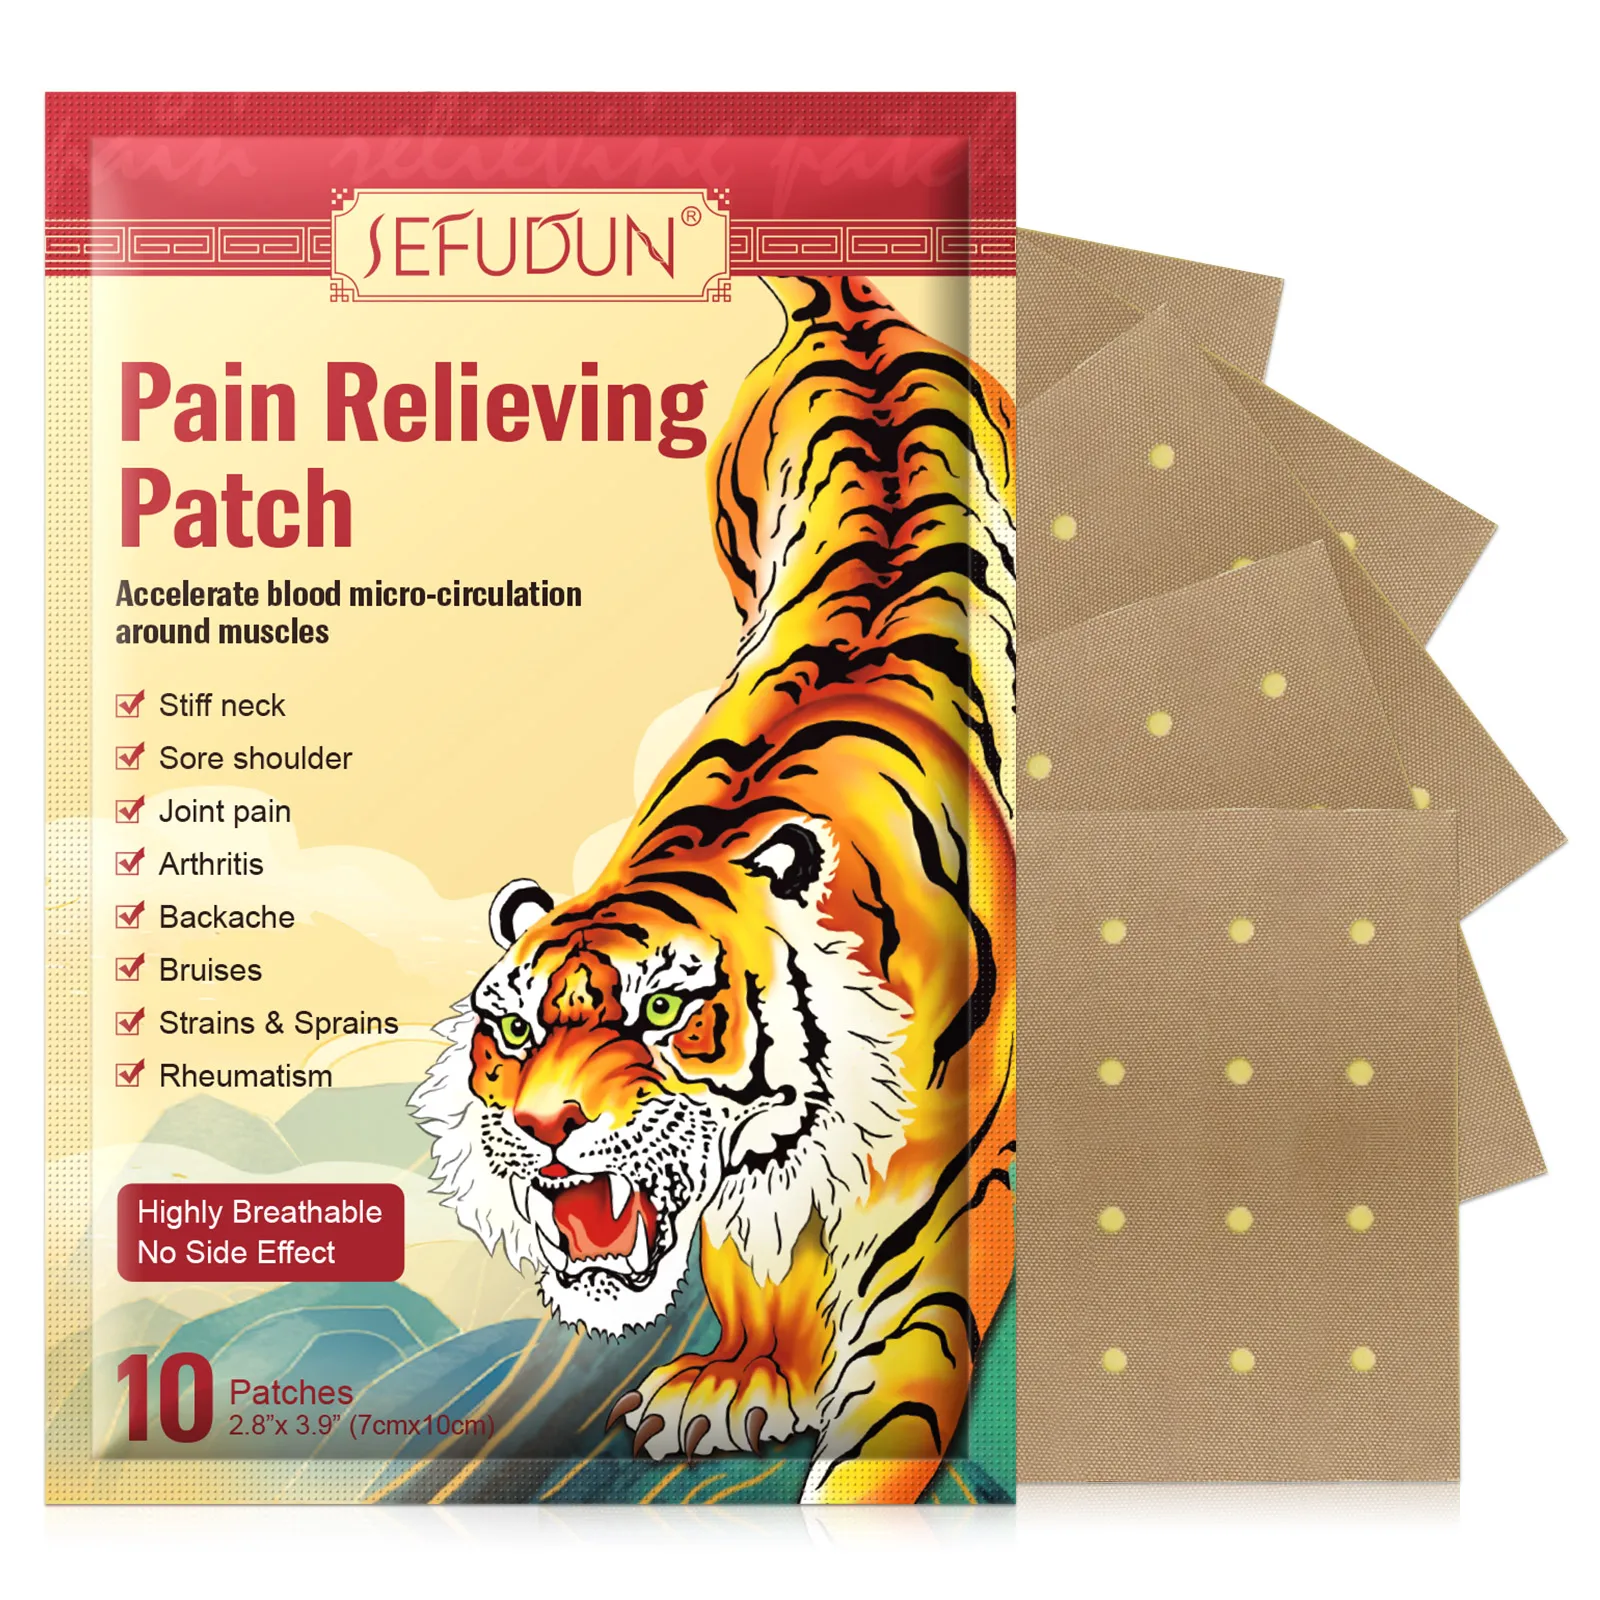 

Fast Acting Long Lasting Herbal Warming Pain Relieving Heat Patches 10 Pcs Pain Relief Plaster for Arthritis Back Shoulder Joint